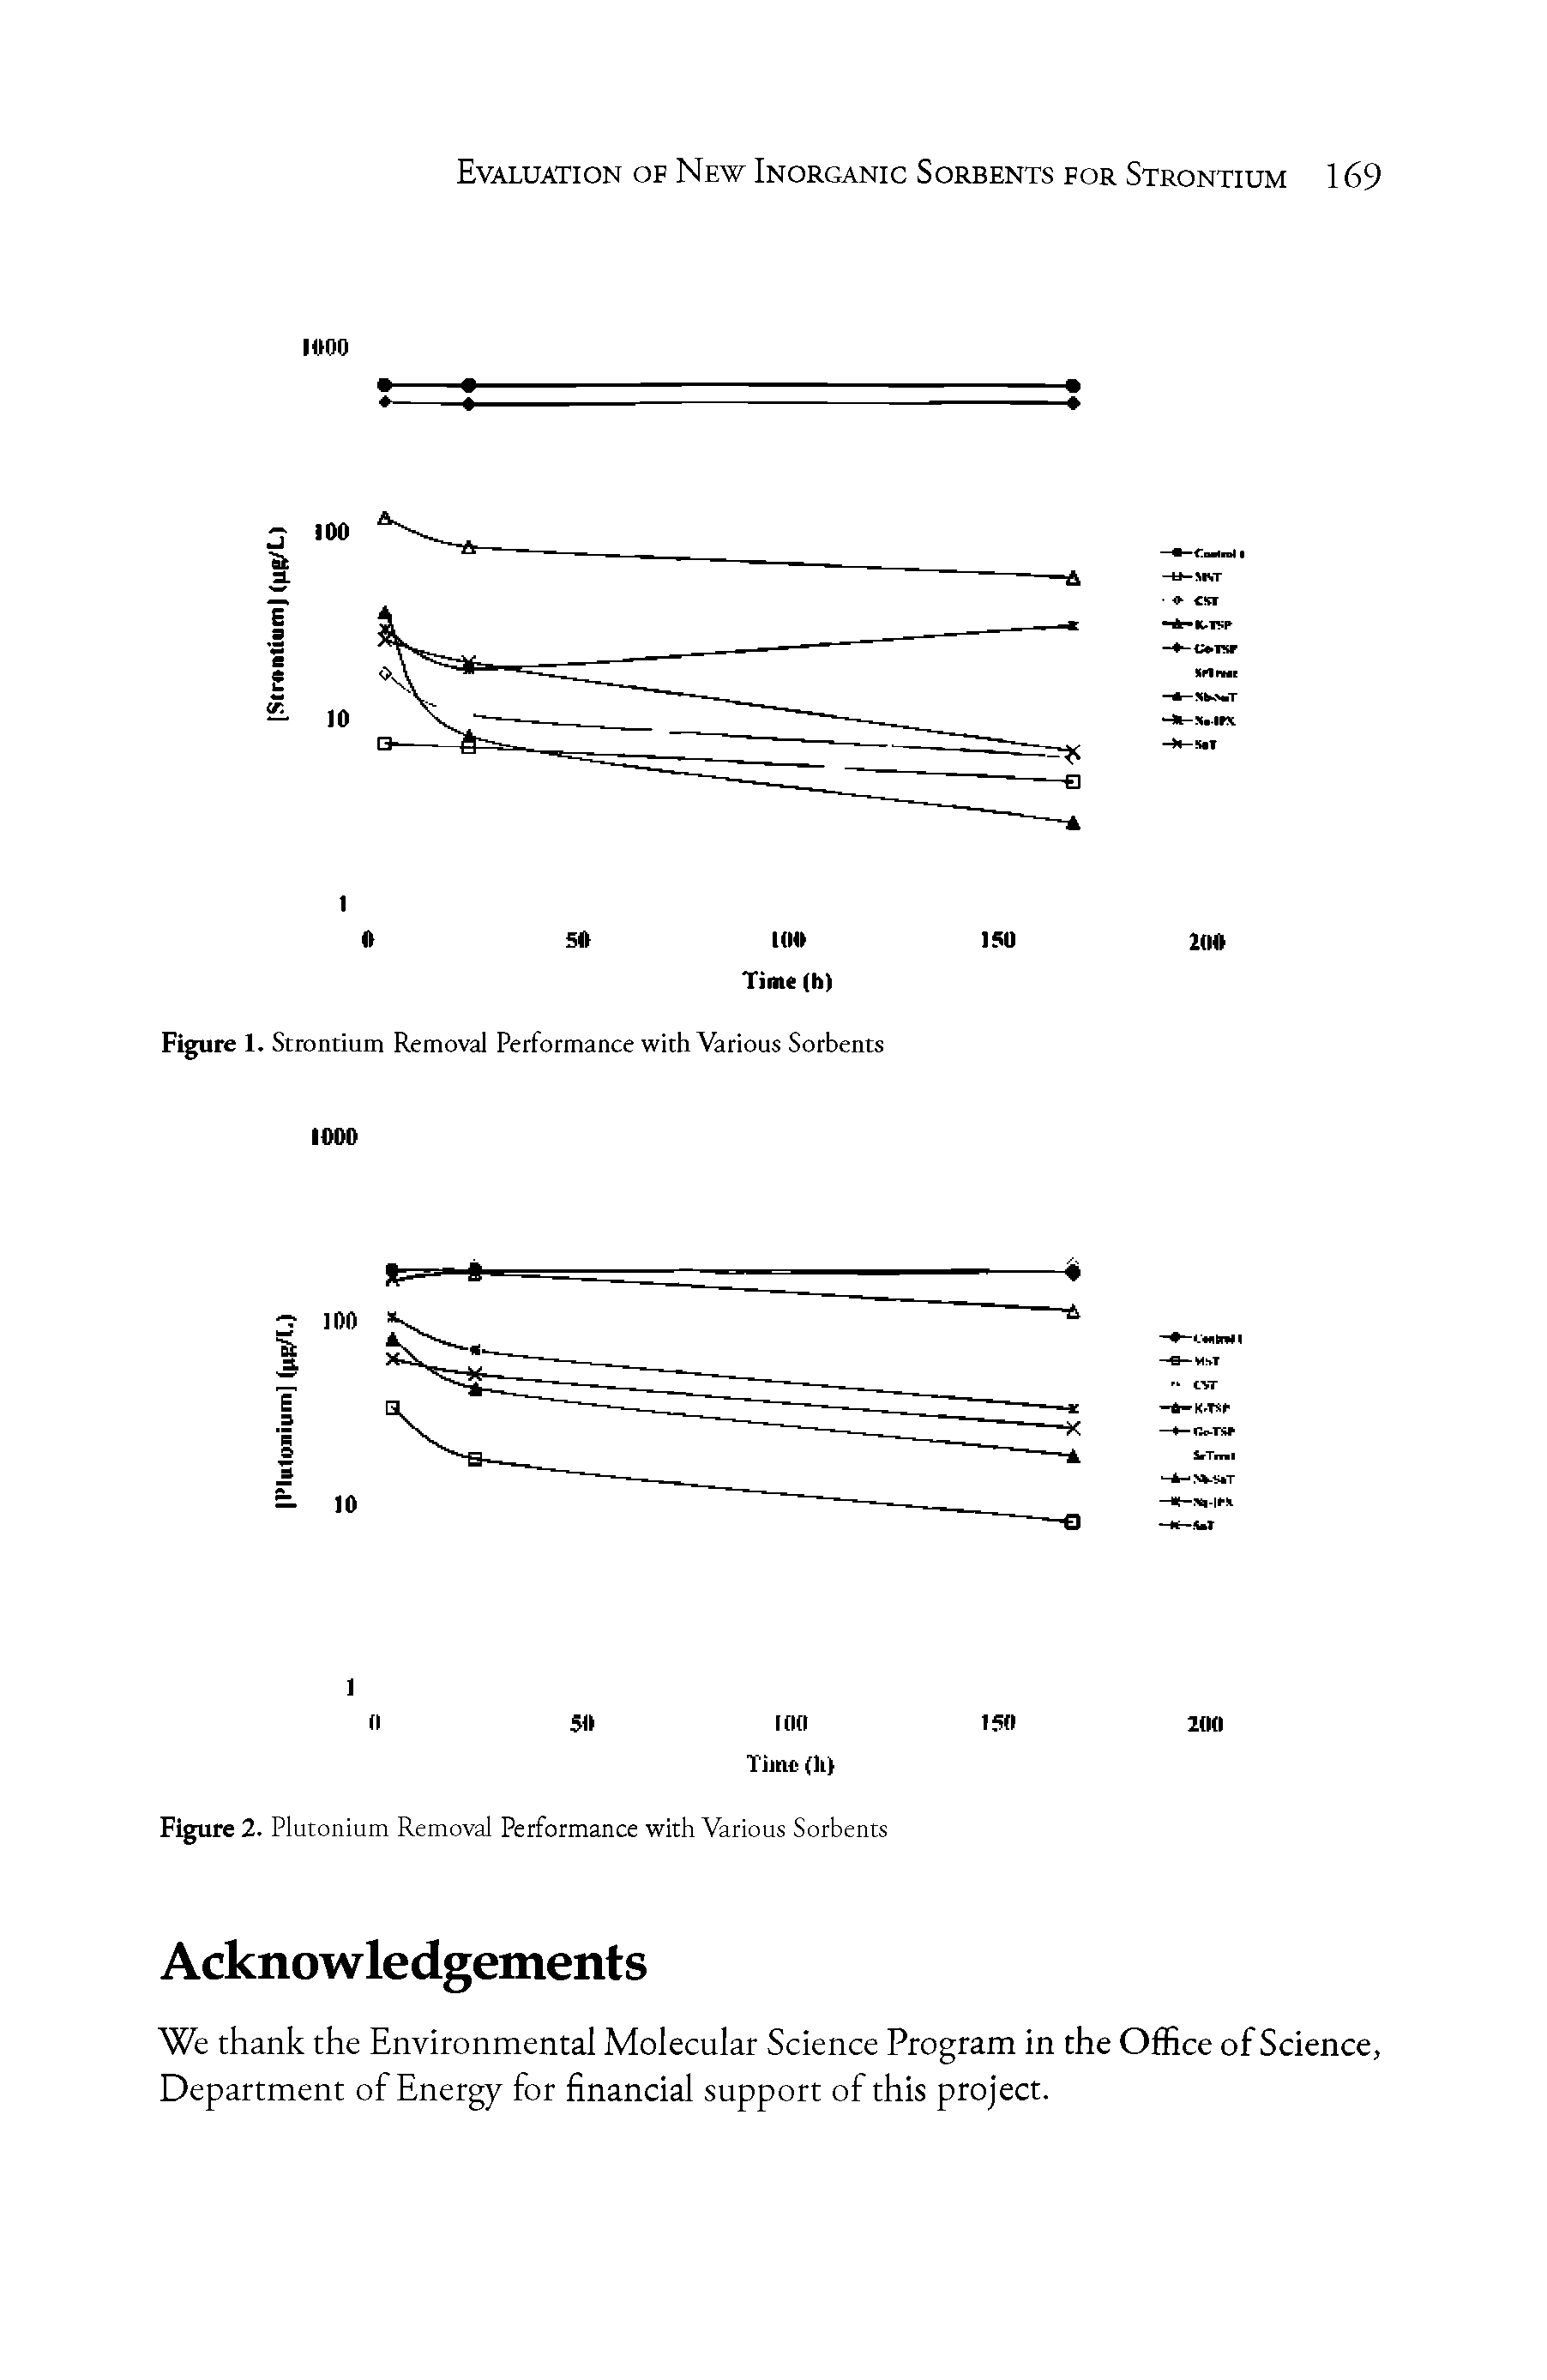 Figure 2. Plutonium Removal Performance with Various Sorbents...